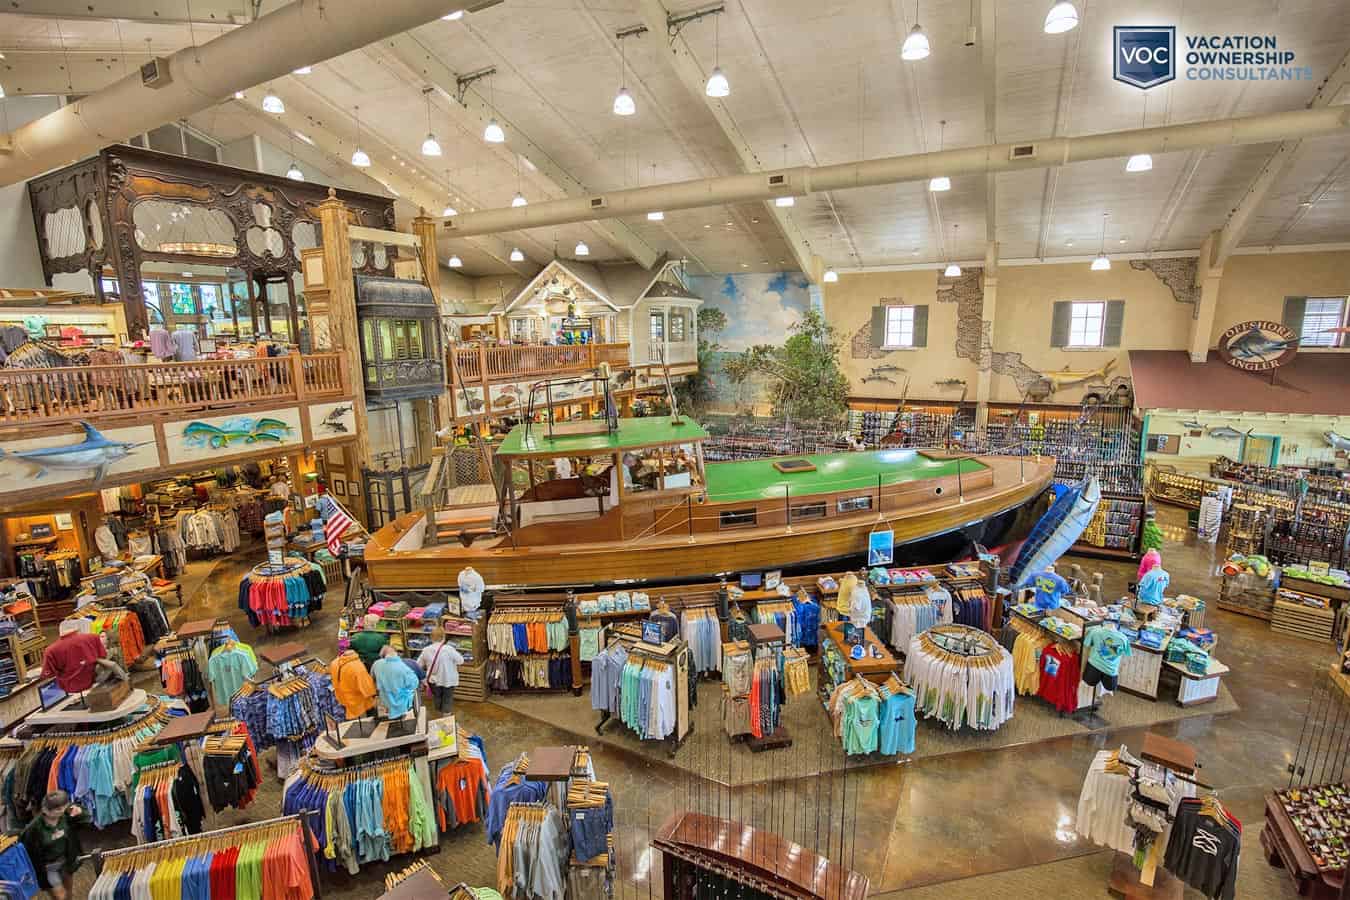 picture-of-the-interior-of-bass-pro-shops-in-florida-where-bluegreen-vacations-sells-timeshare-ownership-to-retail-customers-through-solicitation